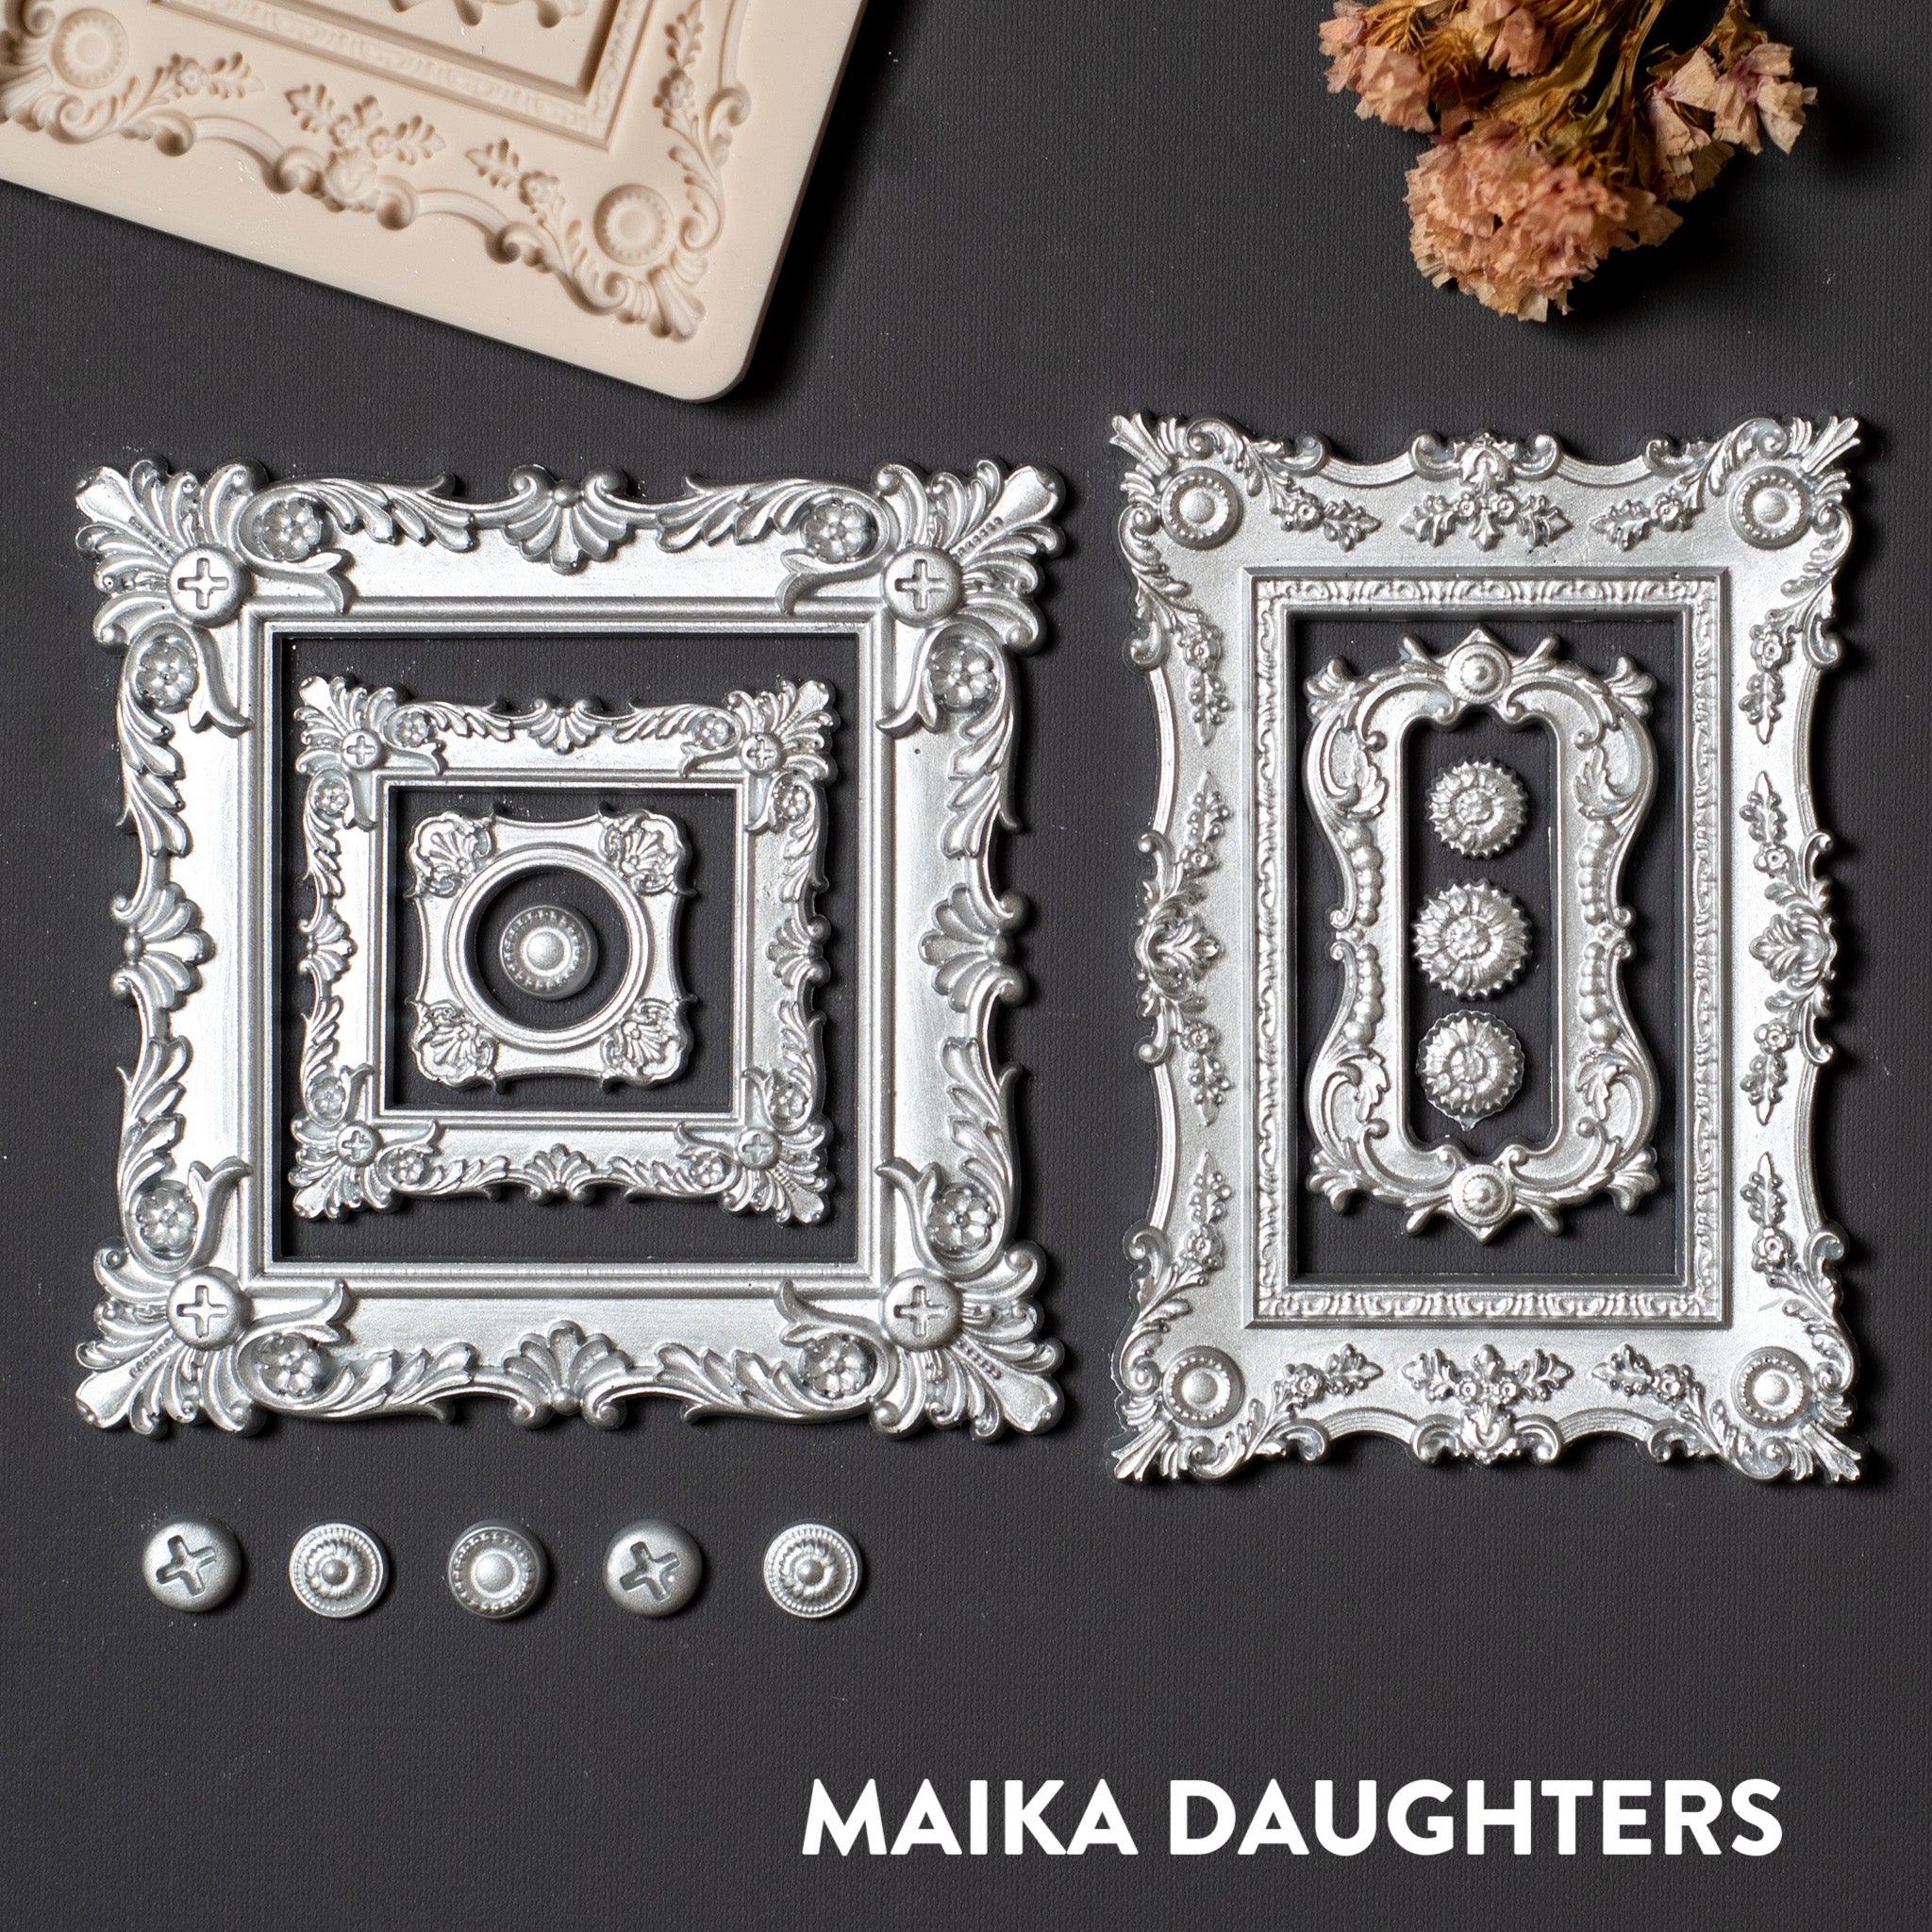 Silver painted castings of 5 ornate scroll frames and button style corner accent pieces.